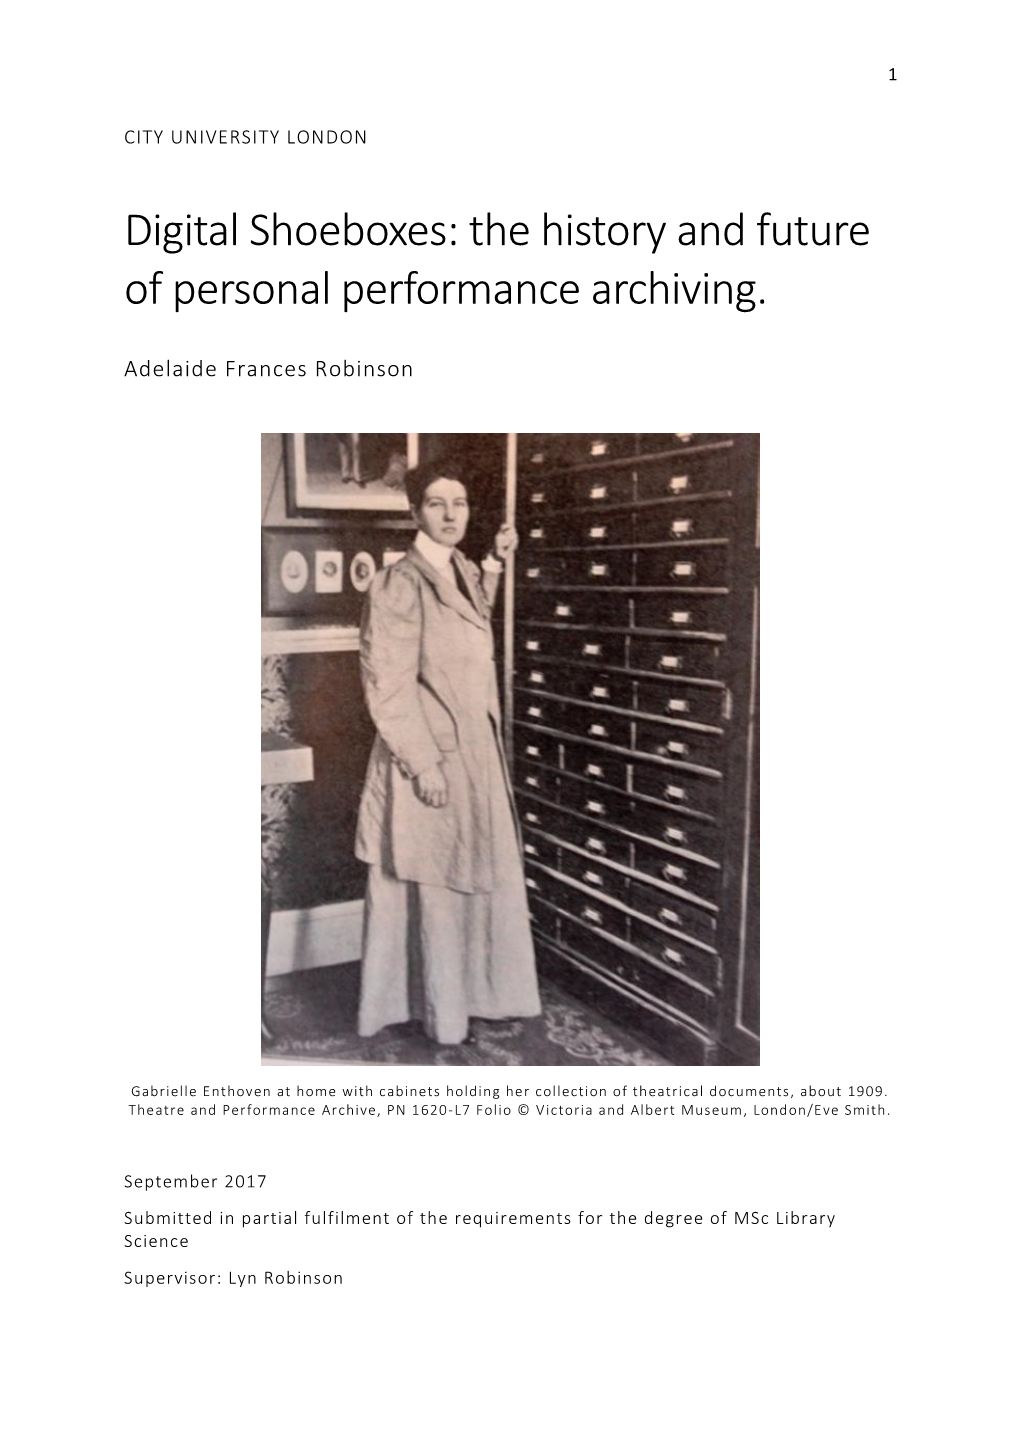 Digital Shoeboxes: the History and Future of Personal Performance Archiving